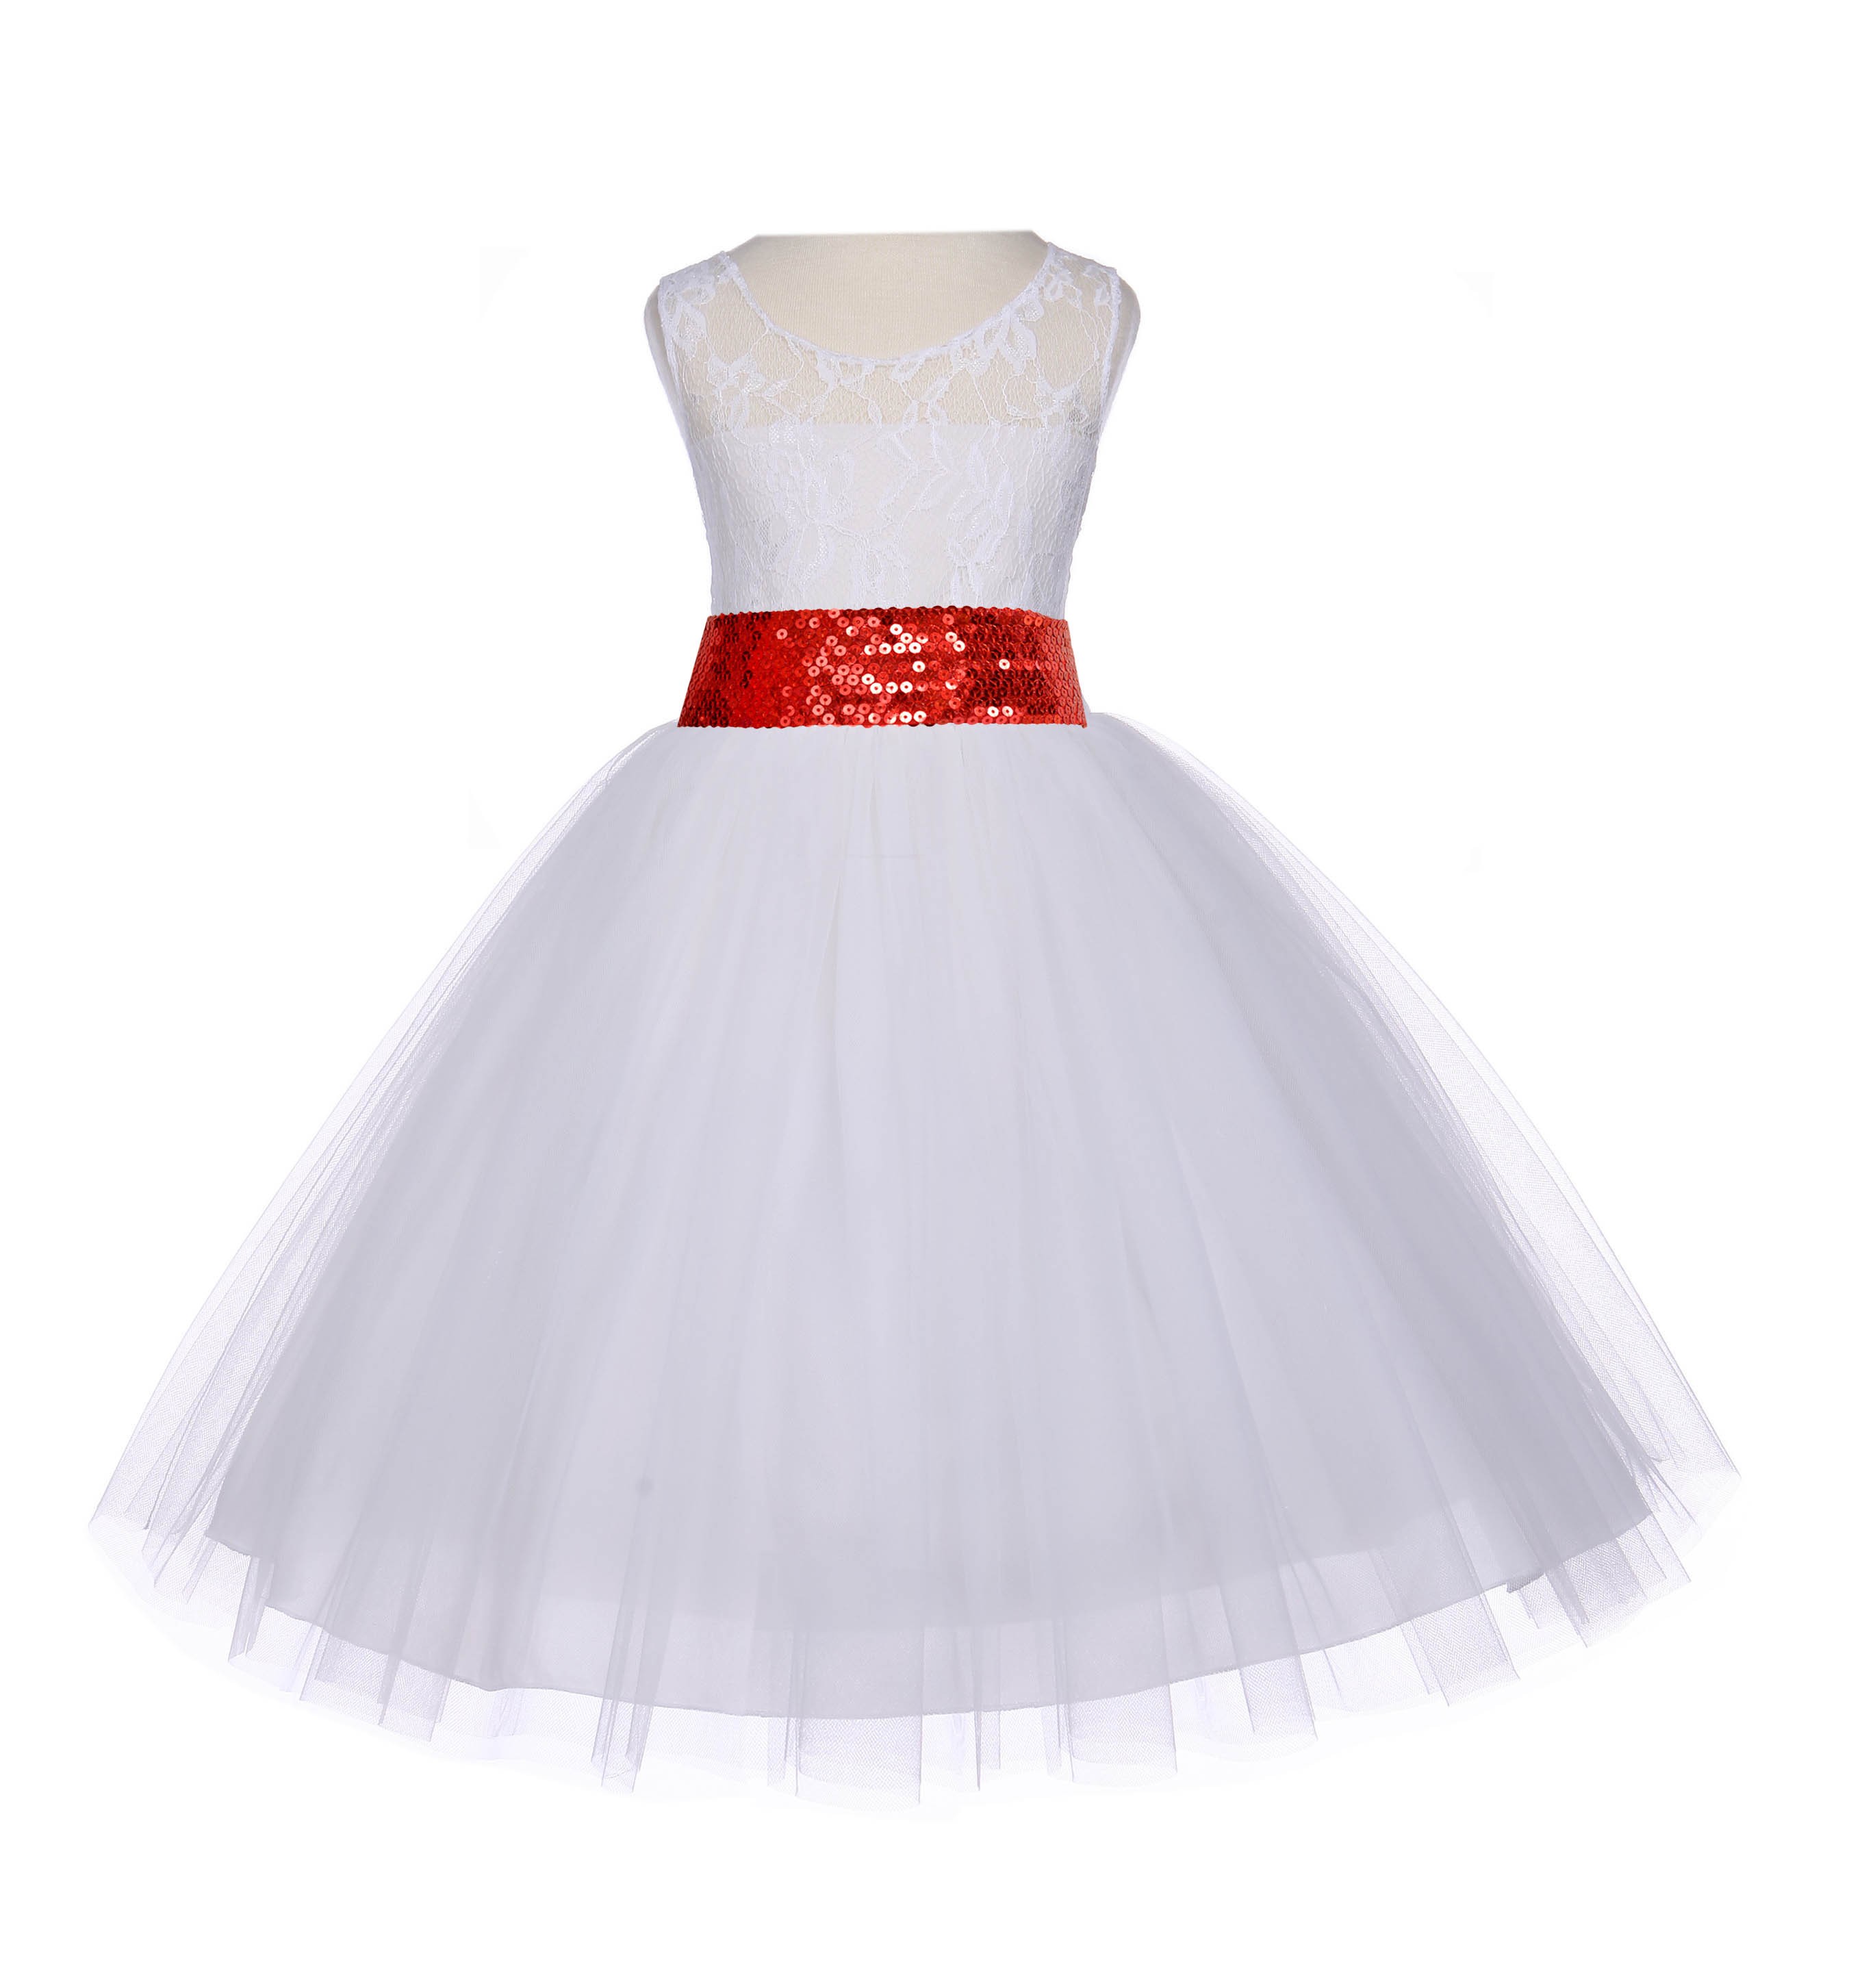 Ivory Floral Lace Bodice Tulle Red Sequin Flower Girl Dress 153mh